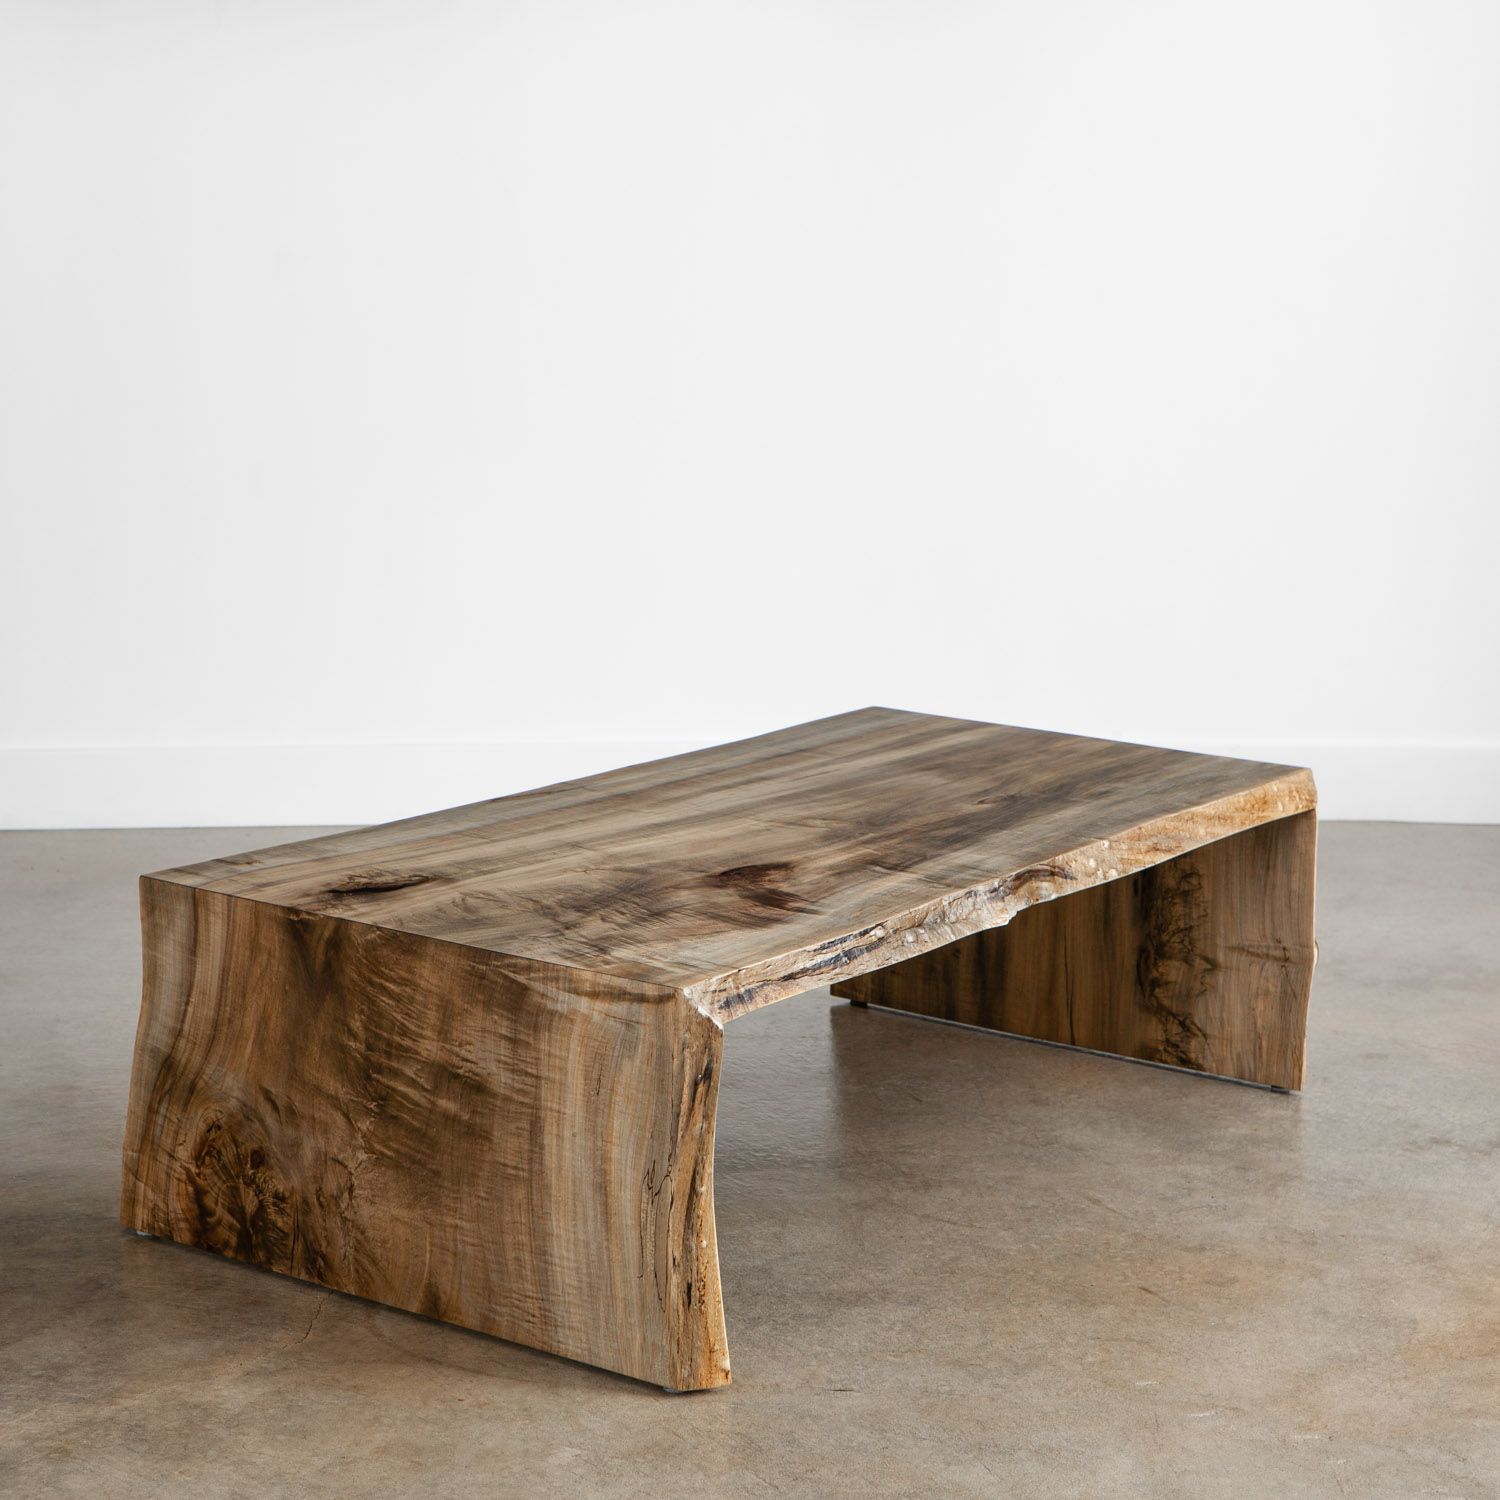 Oxidized Maple Coffee Table No (View 4 of 20)